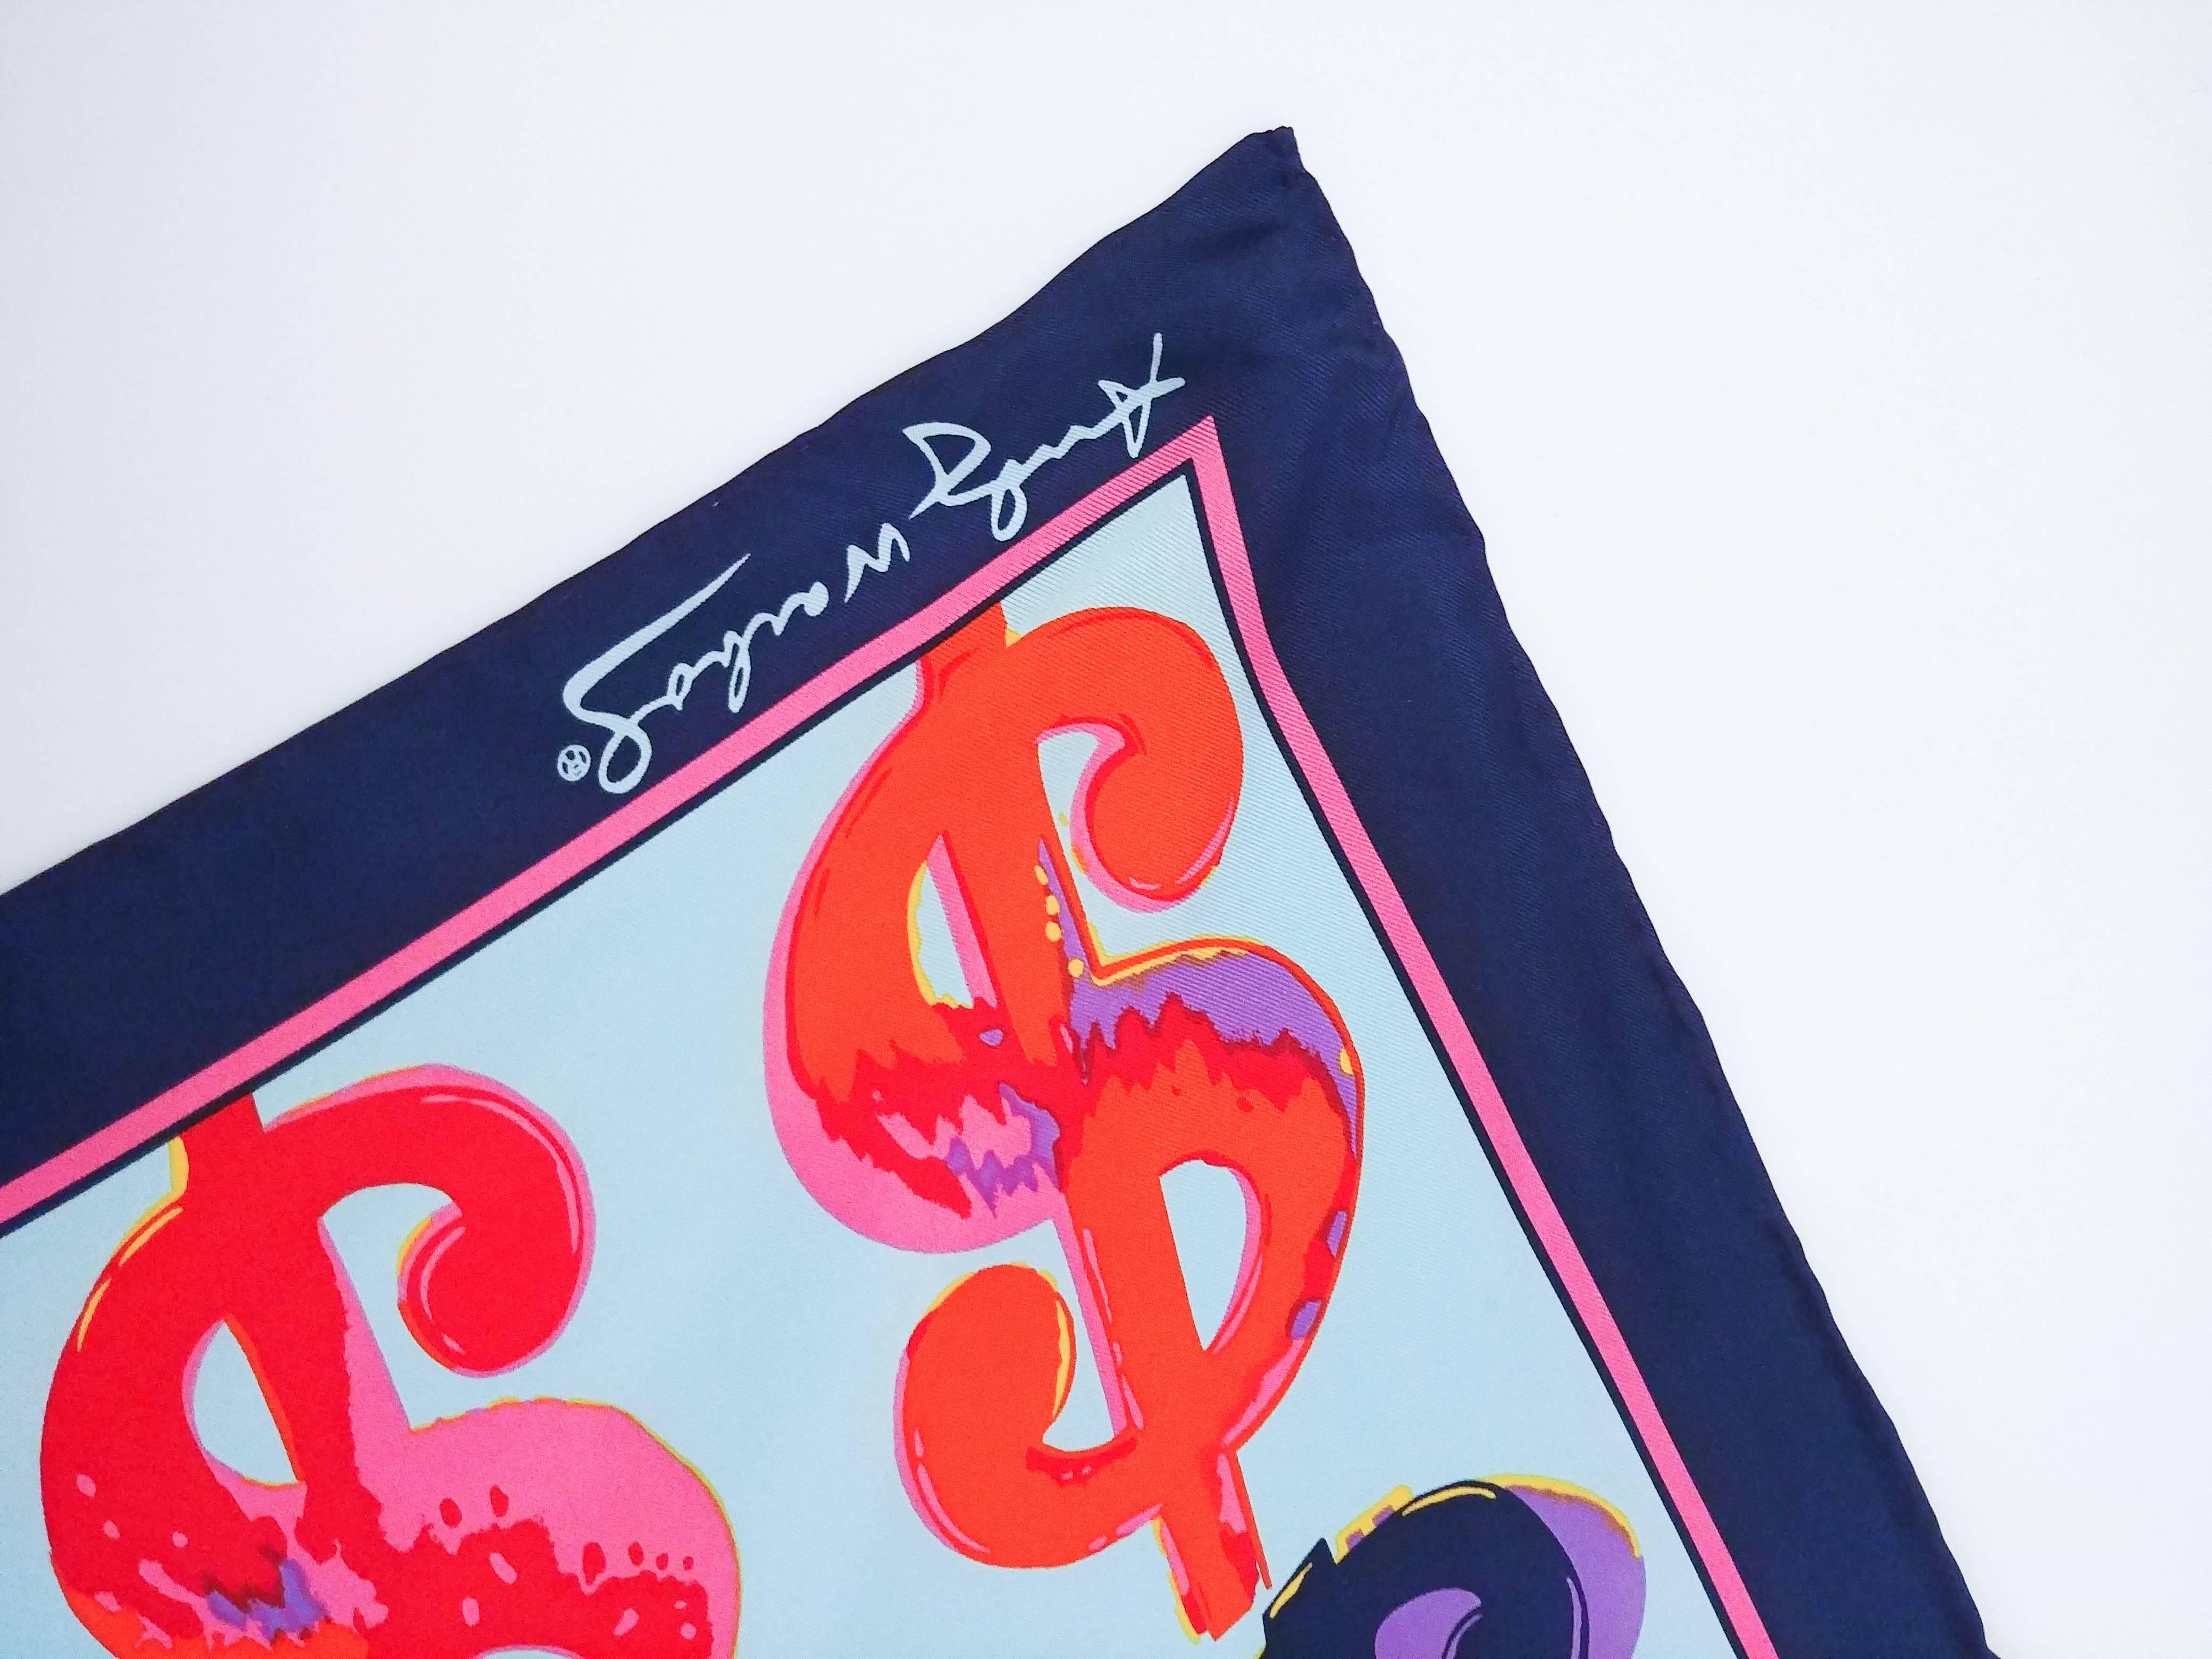 Dollar Pop Art silk scarf after Andy Warhol. Neon colored pop art silk scarf with original tag and hand rolled edges. 